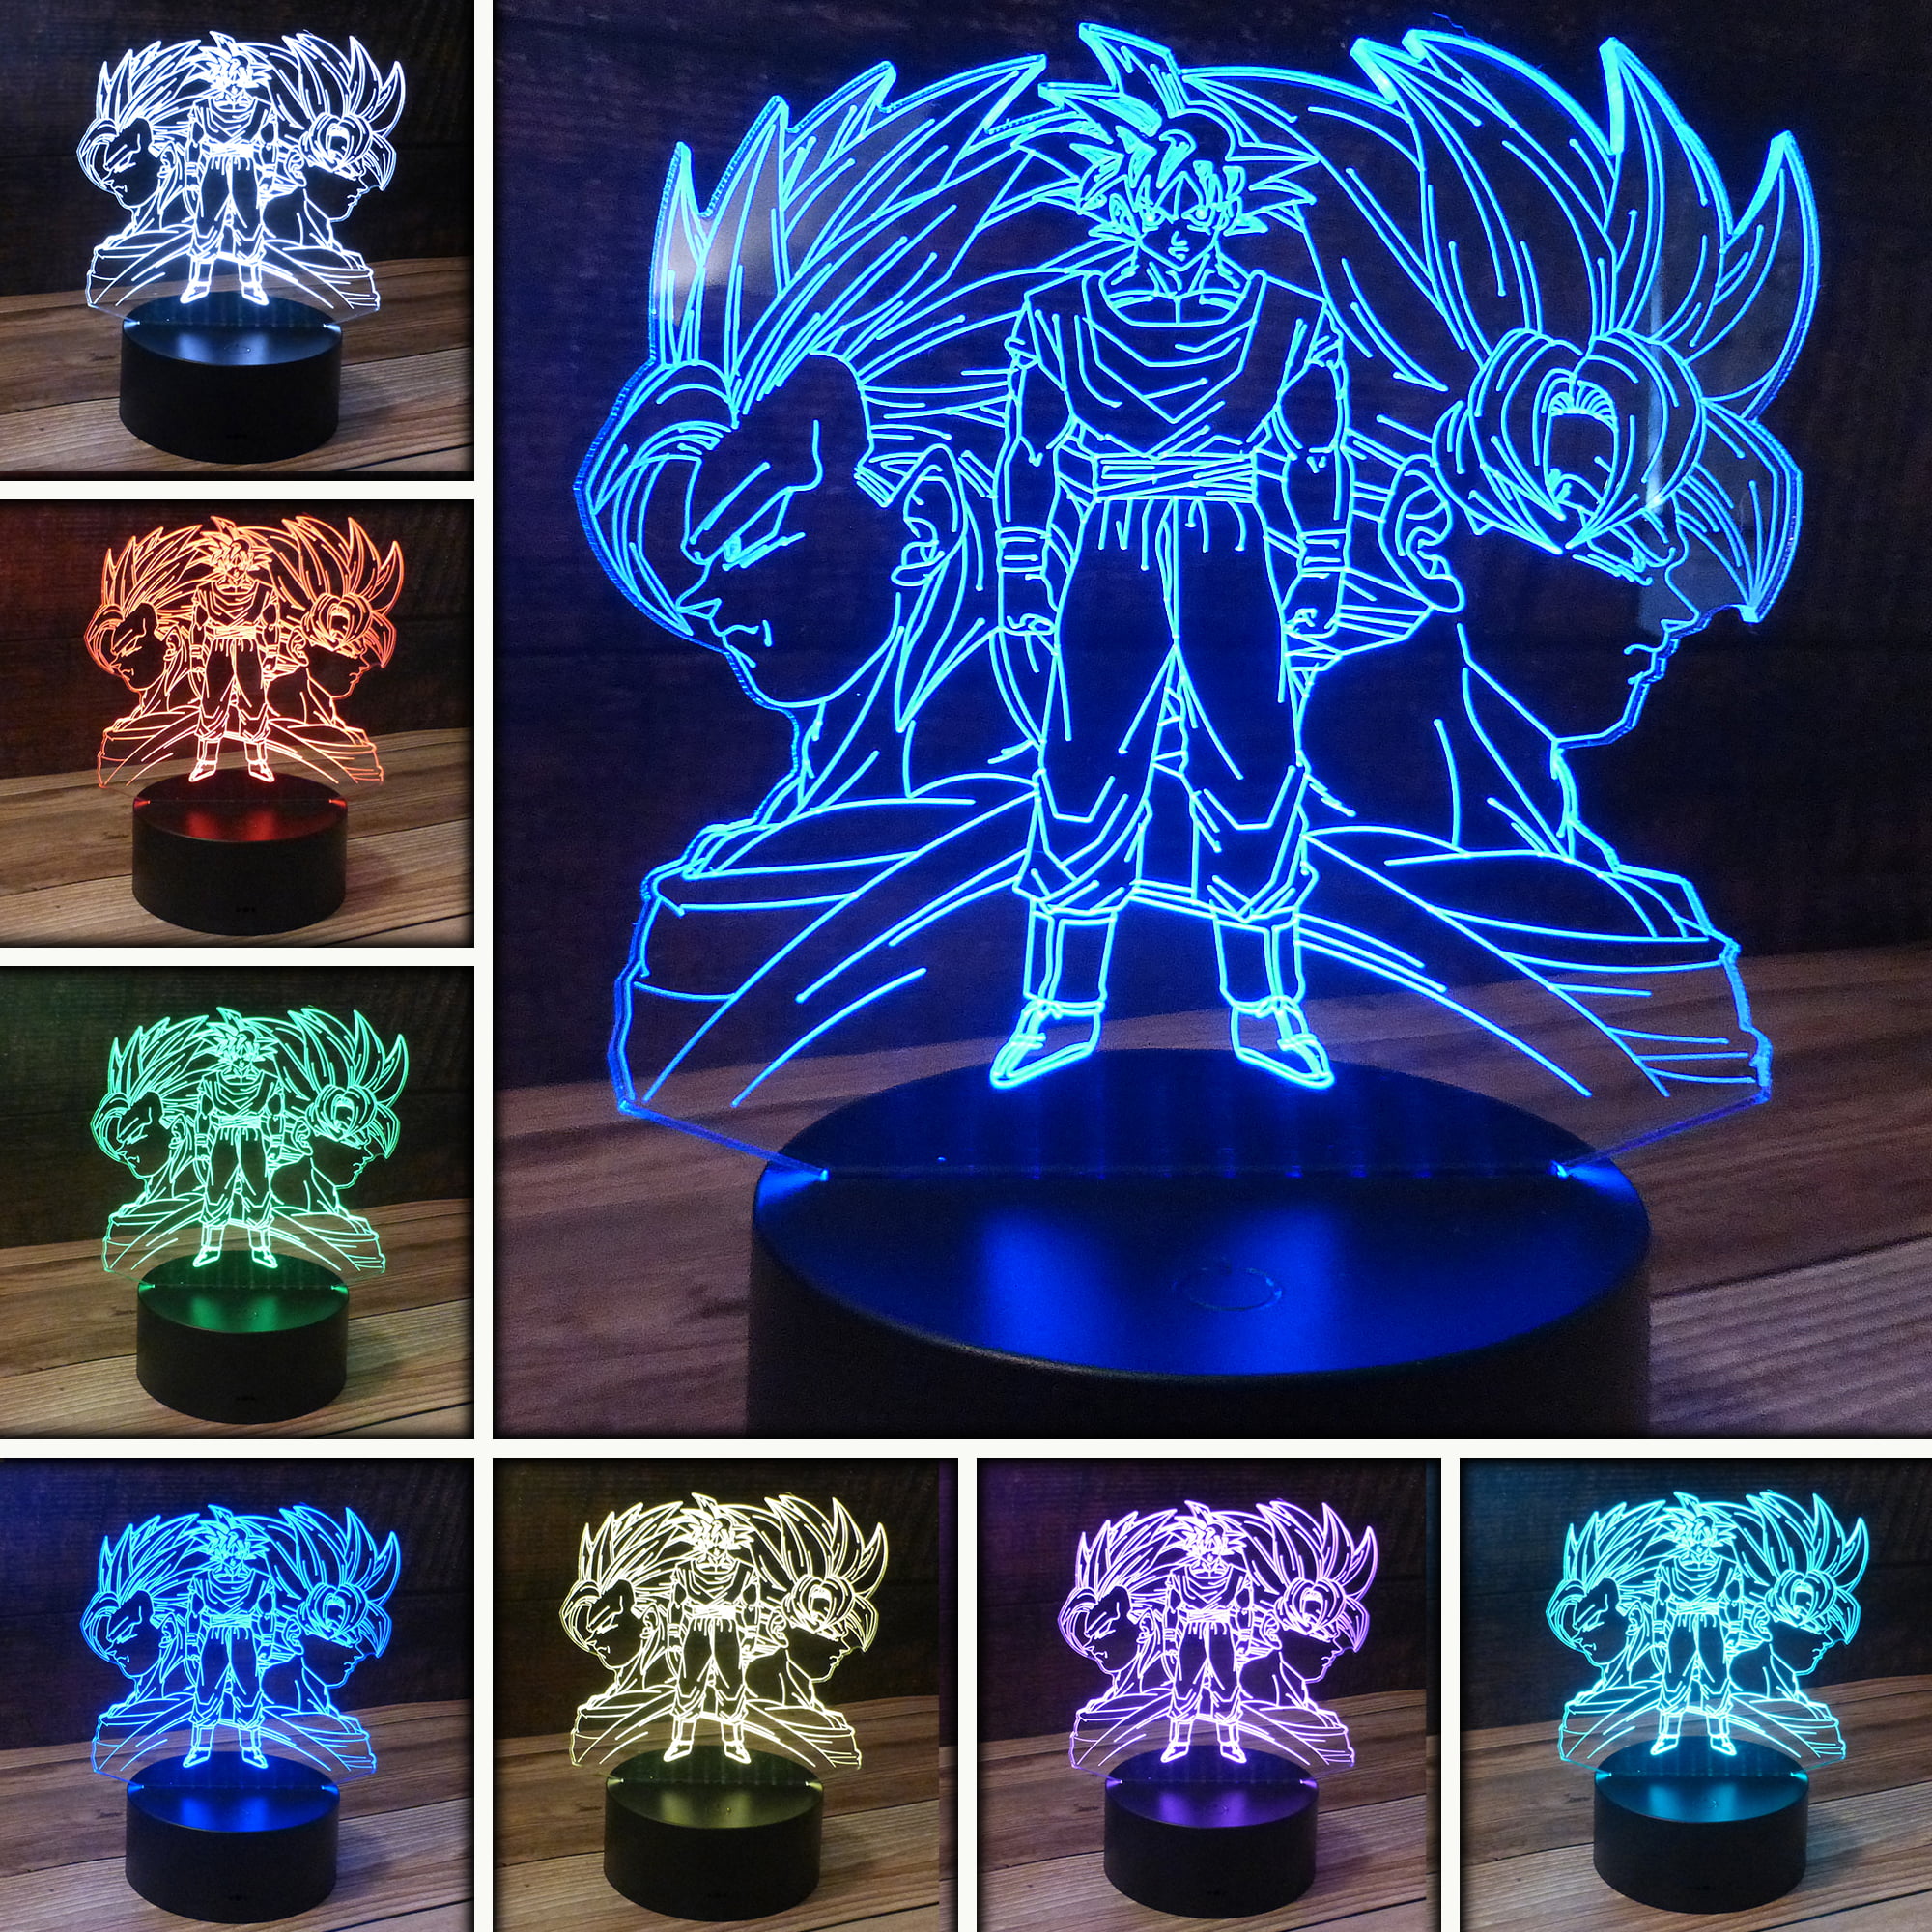 Z Son Goku 3D Illusion LED Night Light Touch Table Desk Lamp 7 Color Dragon Ball 